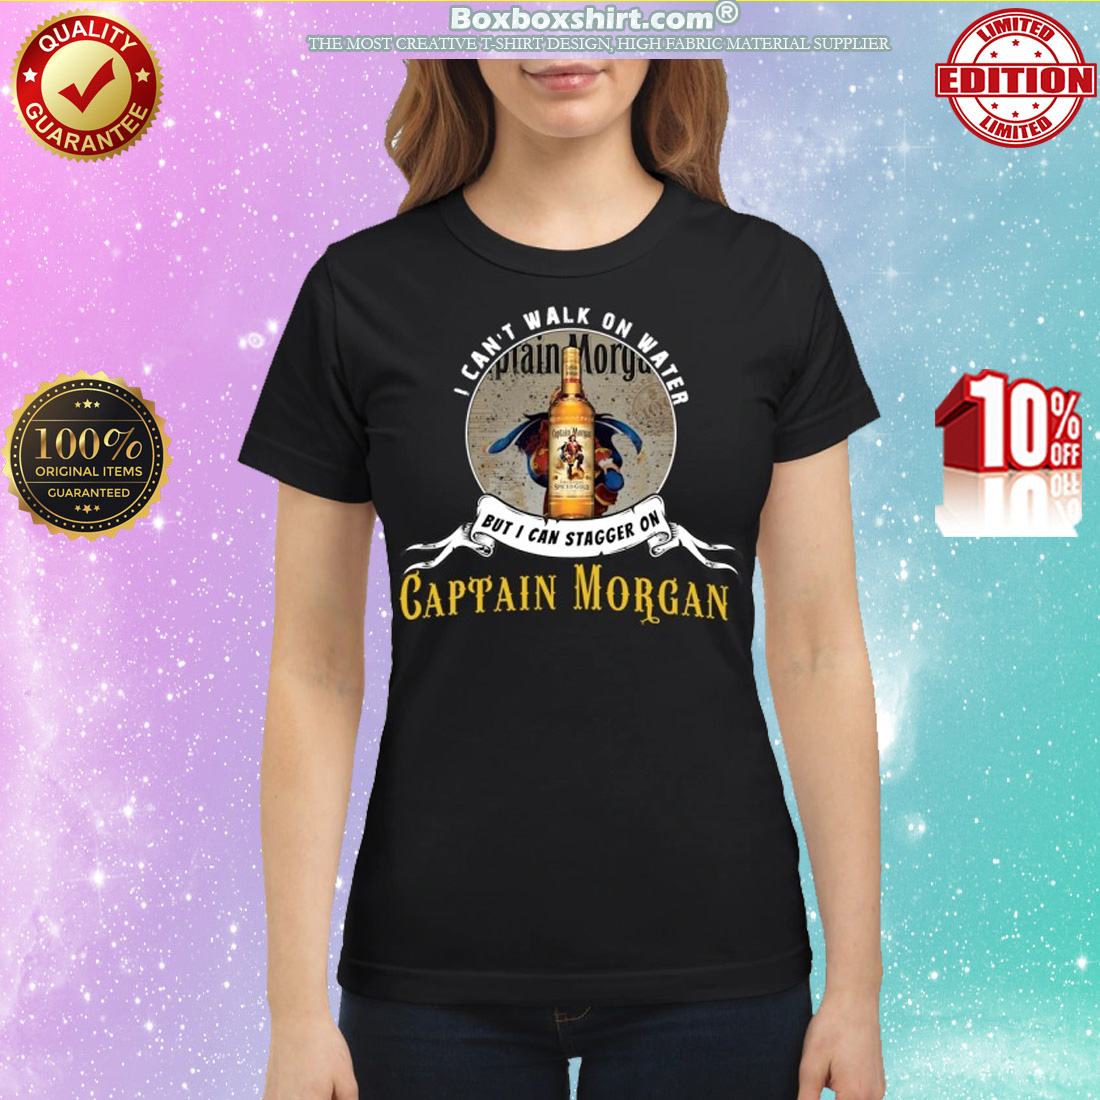 I can't not walk on water but I can stagger on Captain Morgan classic shirt